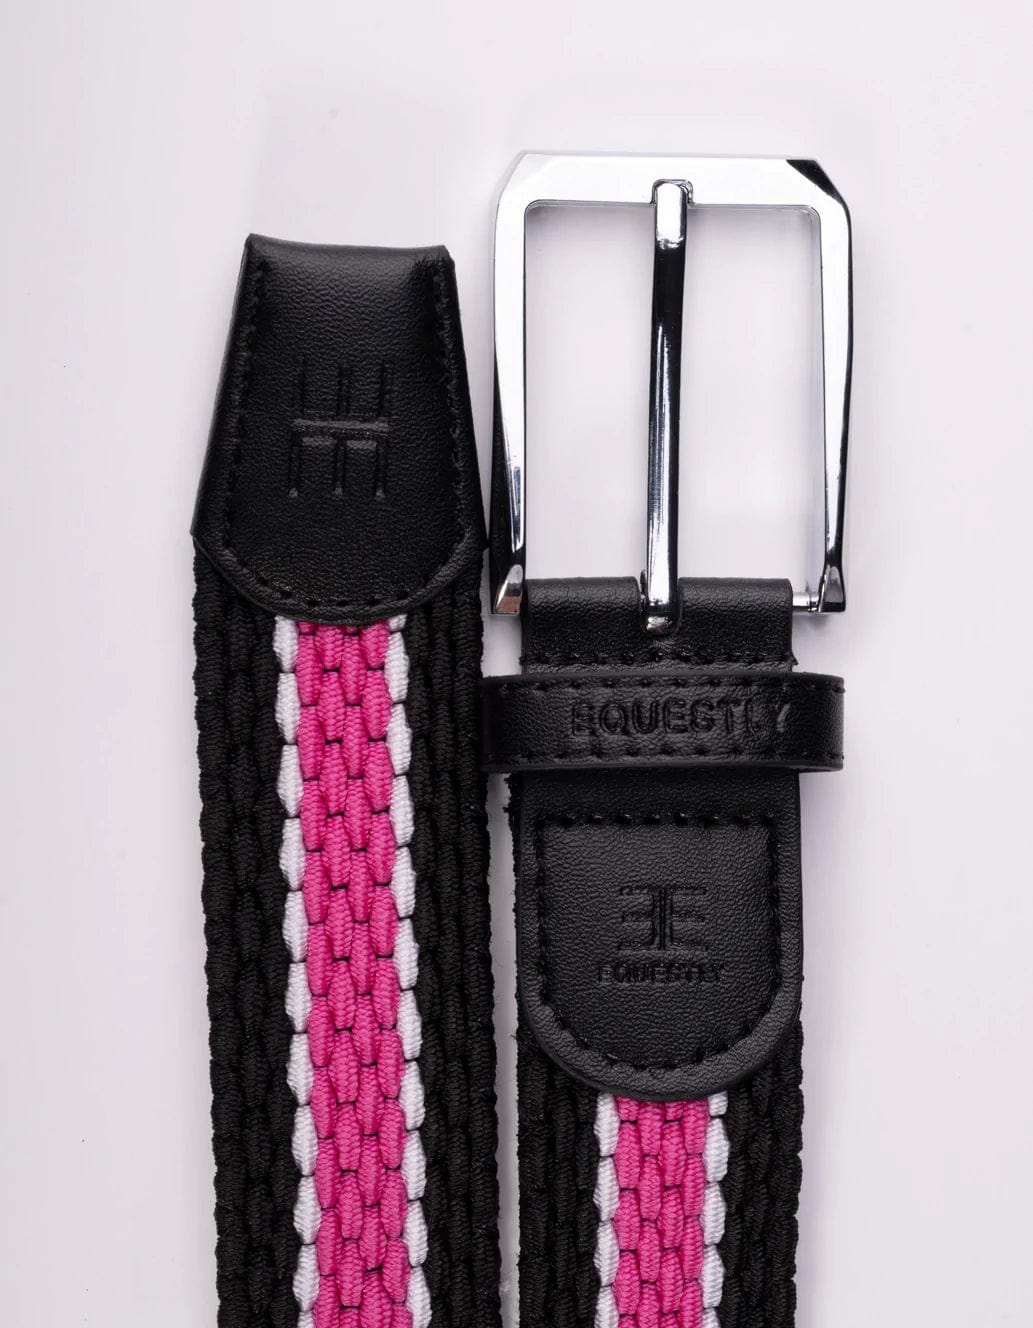 thebridleboutique  Brand New Elastic Riding BeltsAvailable in two